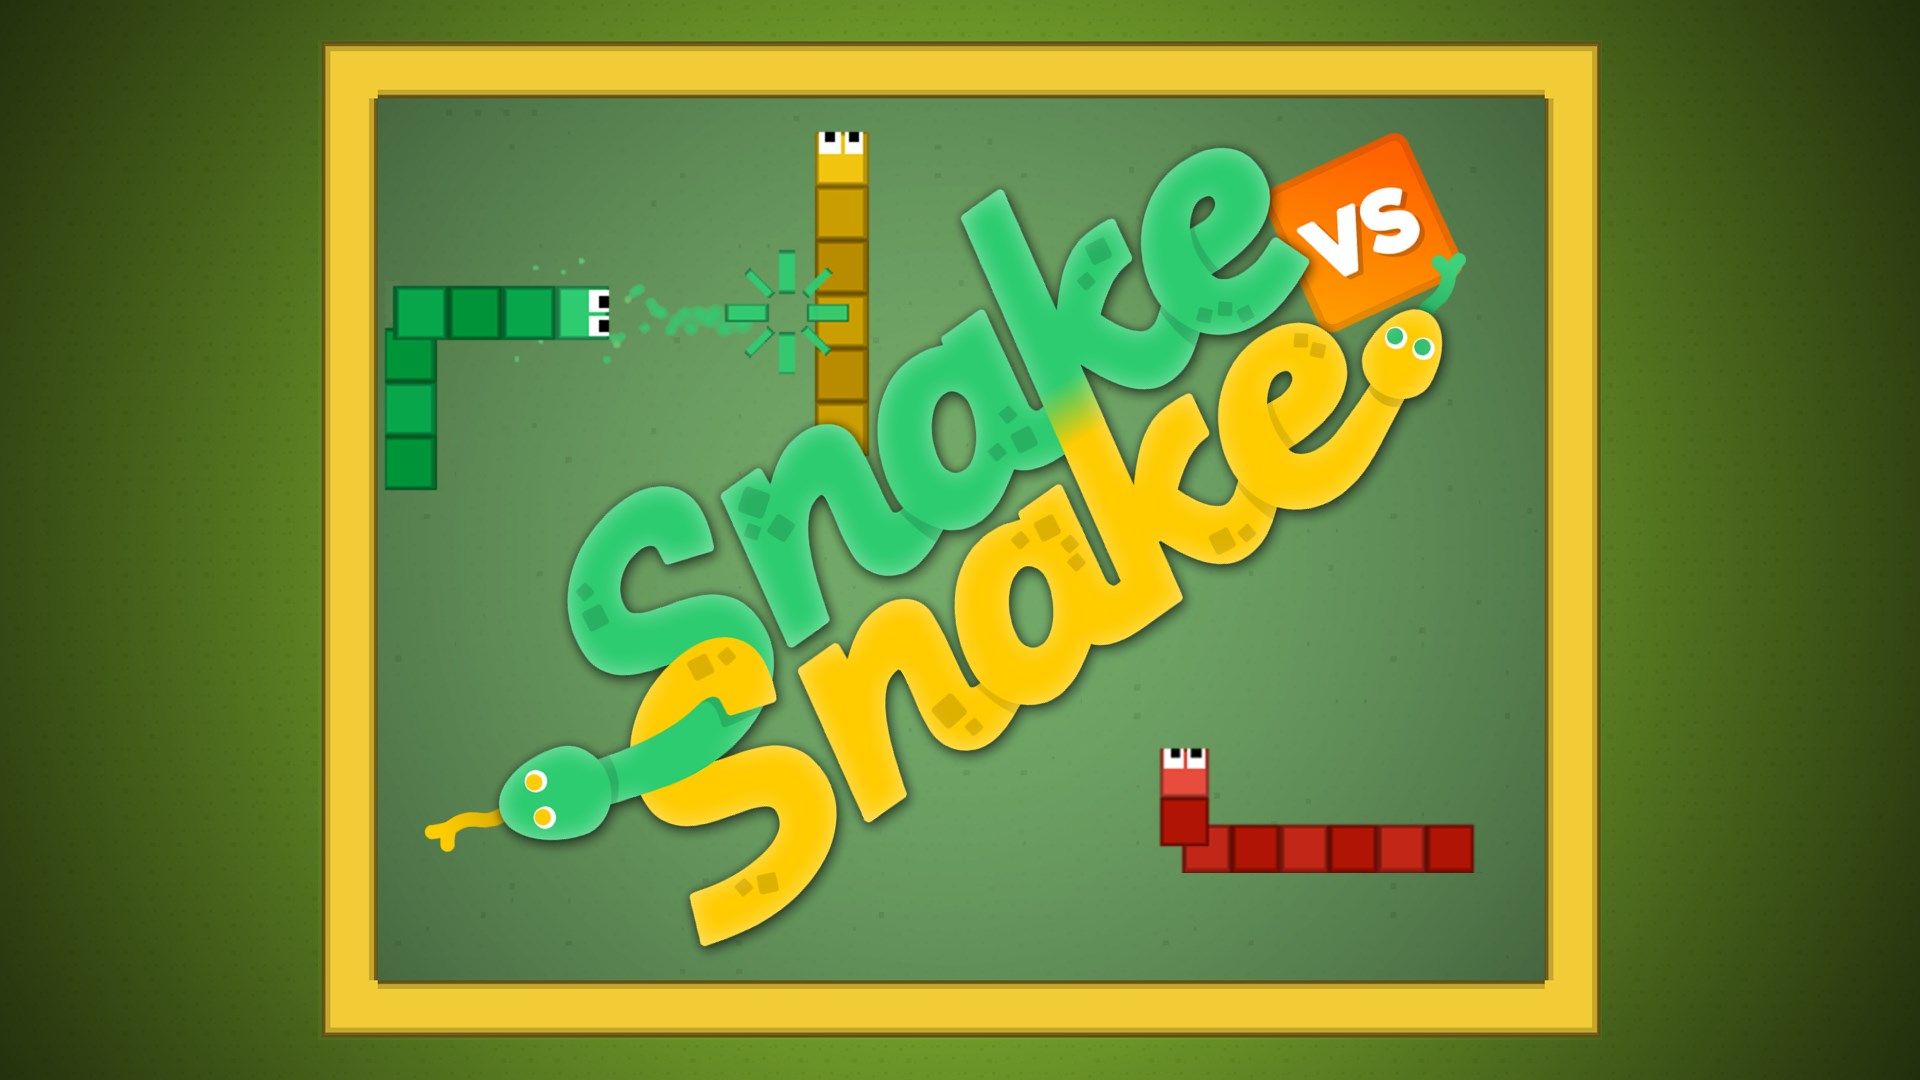 Snake Game - Official game in the Microsoft Store